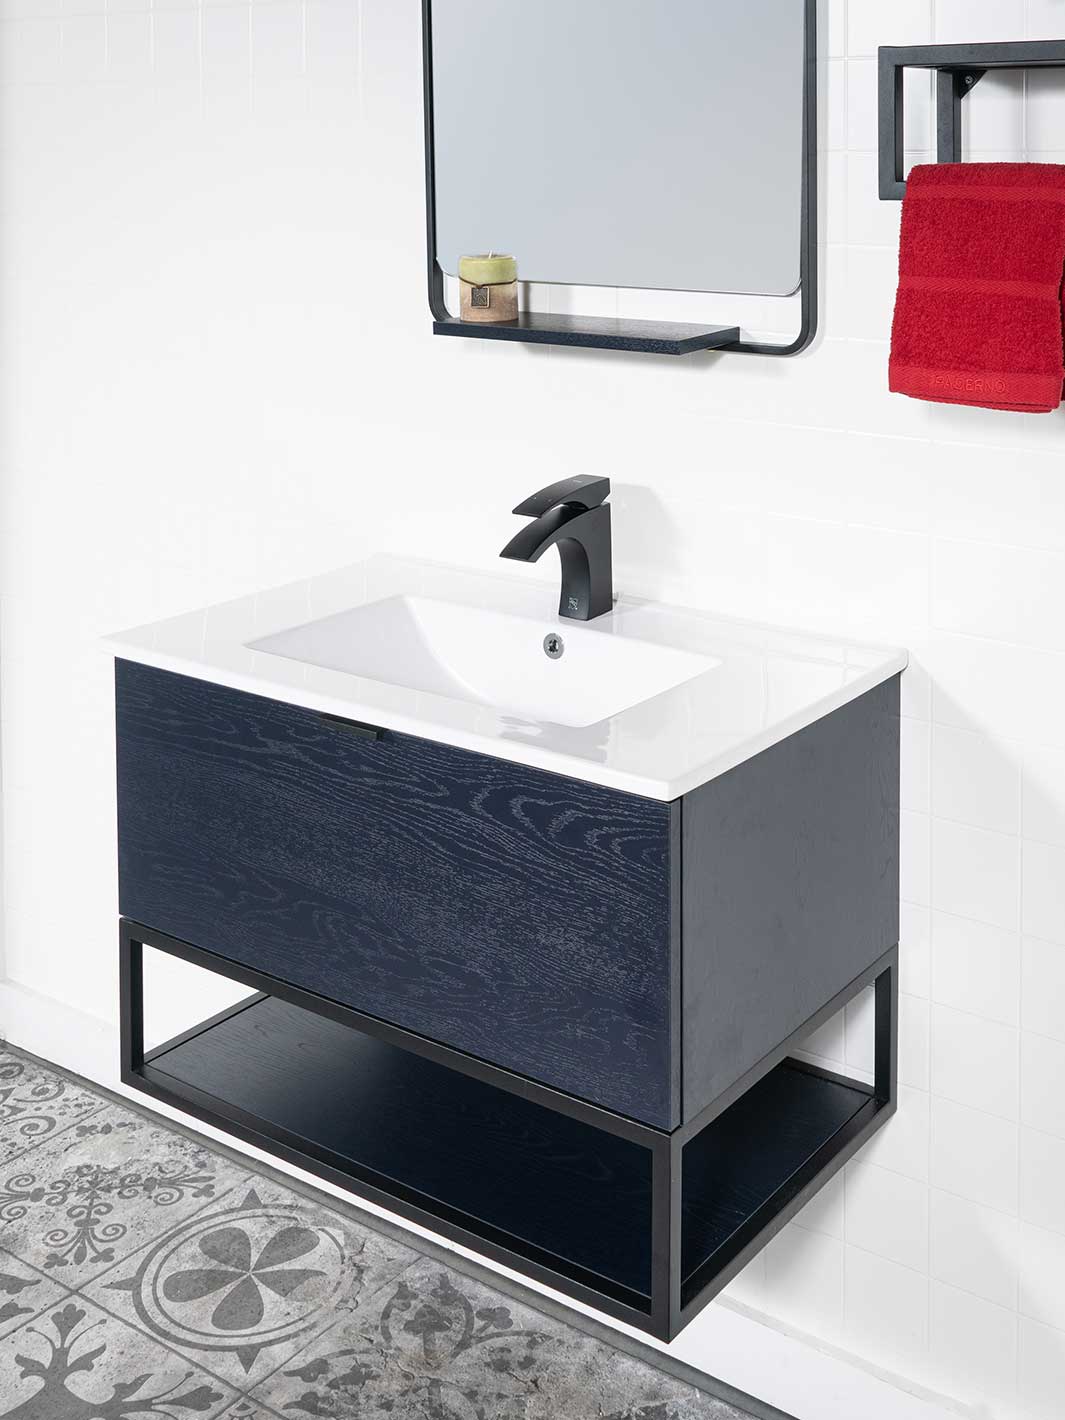 Blue black floating style vanity with white ceramic sink, and black faucet